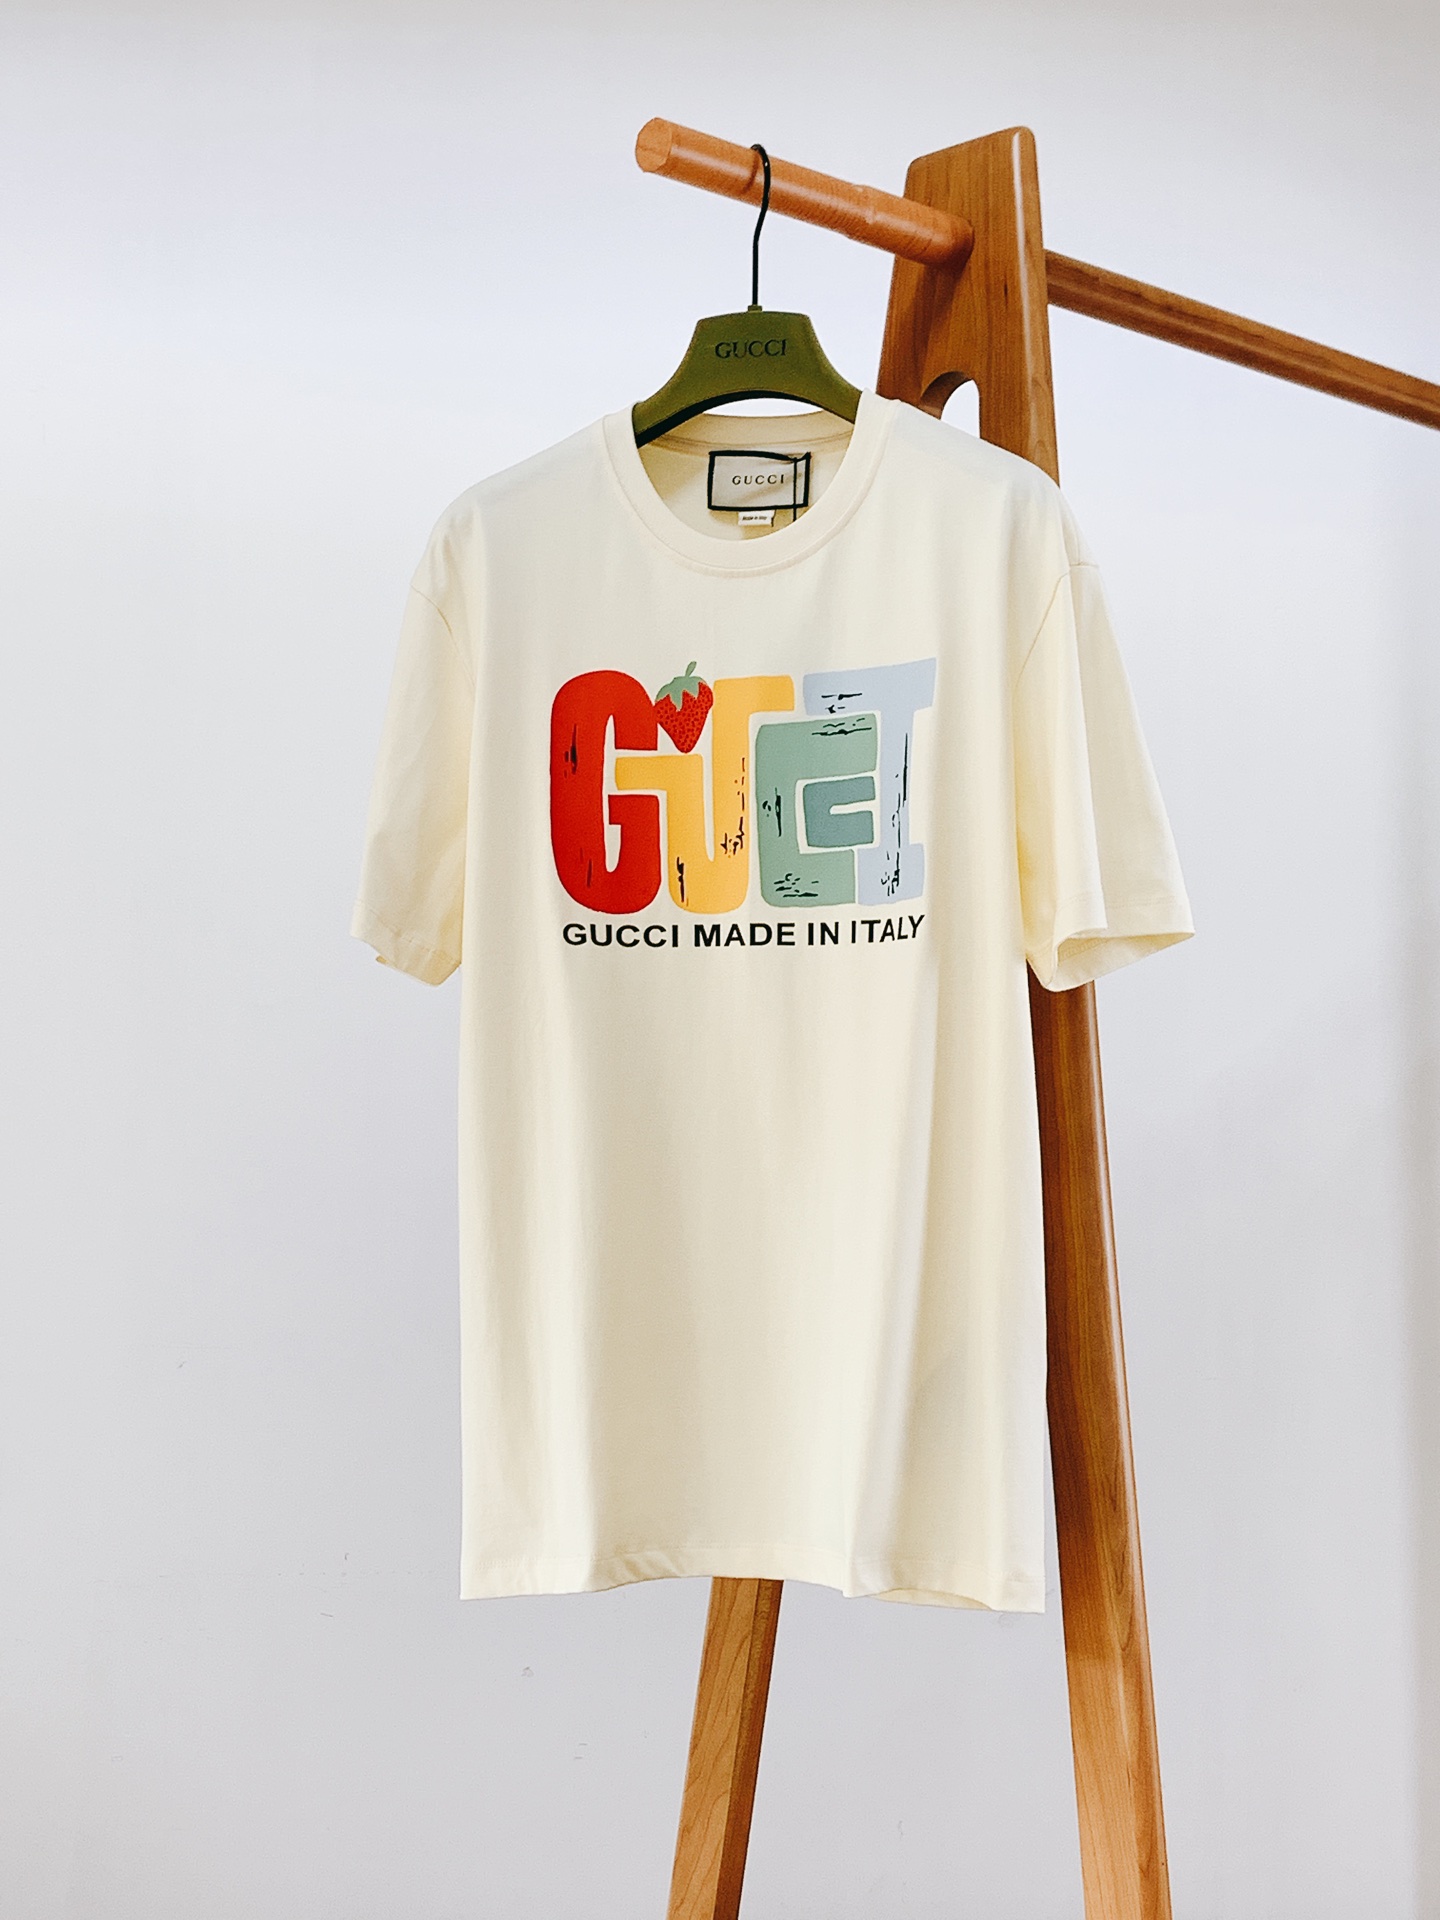 Gucci Clothing T-Shirt Printing Unisex Cotton Knitted Knitting Spring/Summer Collection Vintage Short Sleeve